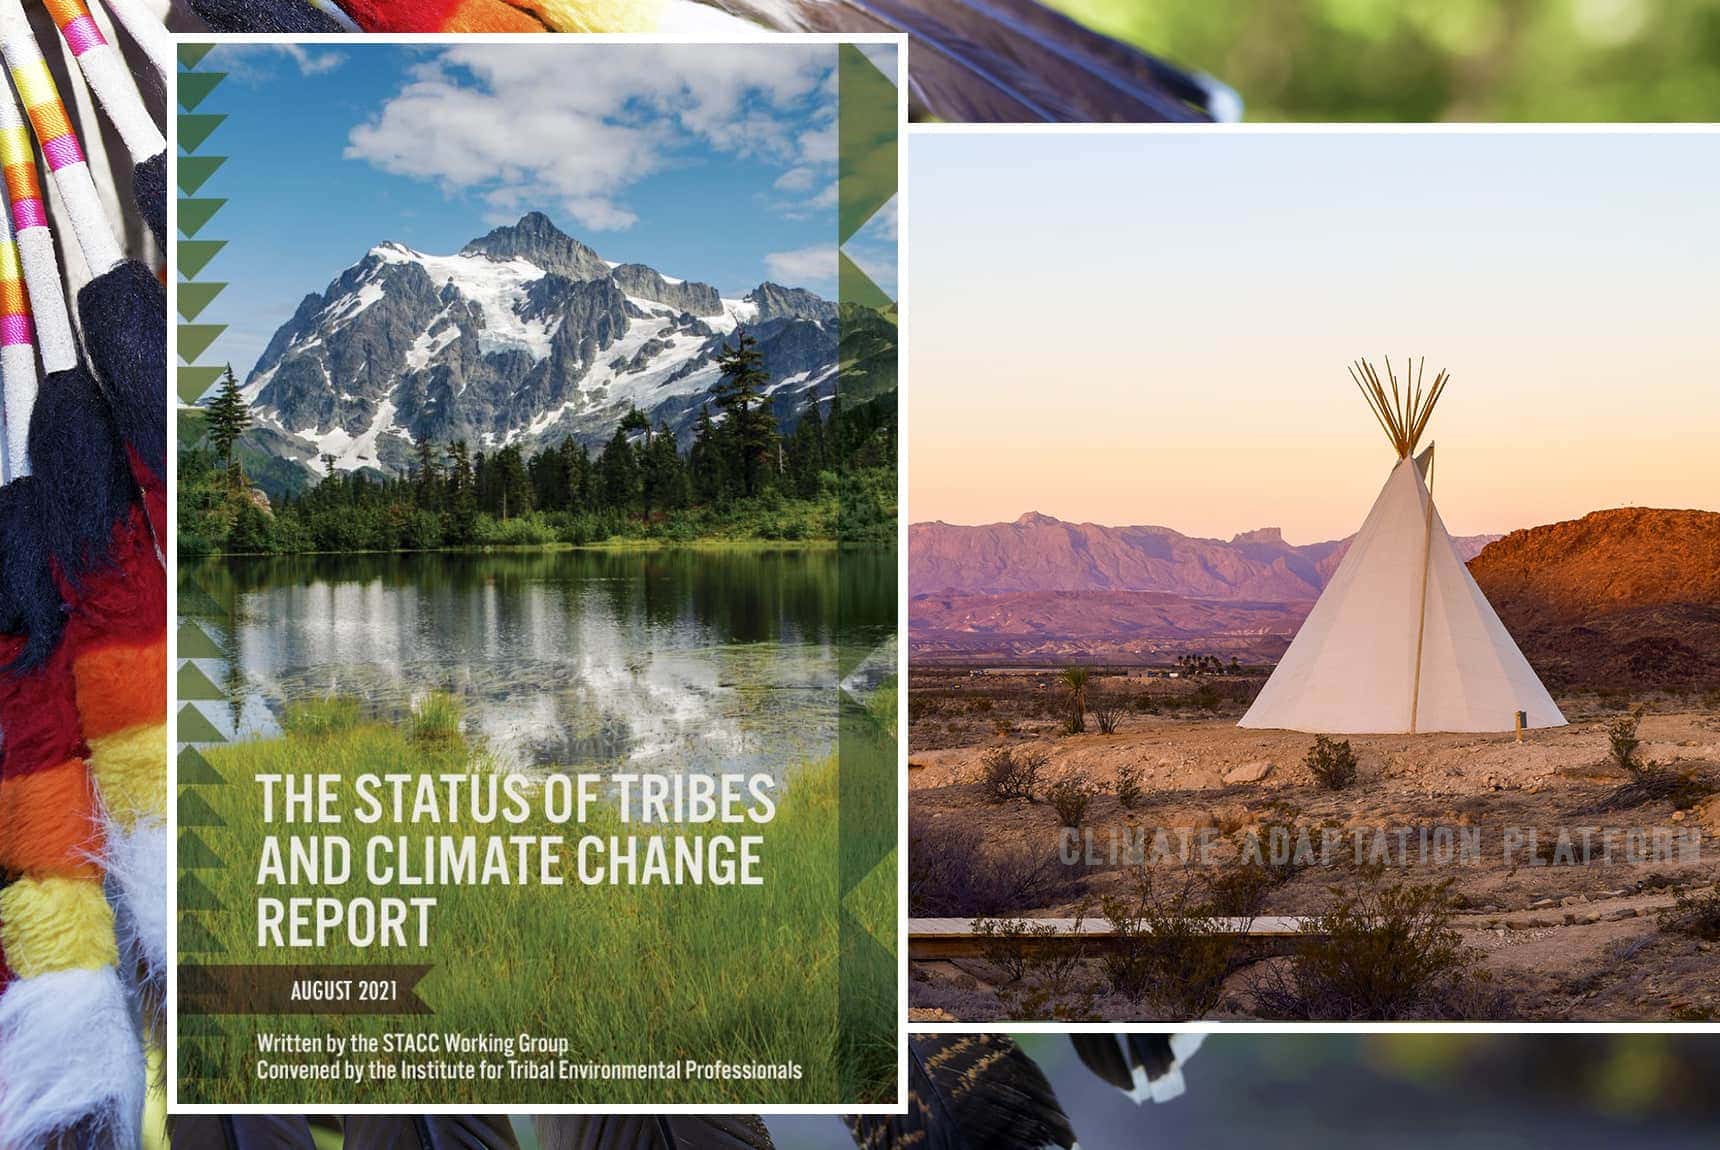 Alliance Team Contributes to 2021 Status of Tribes and Climate Change Report